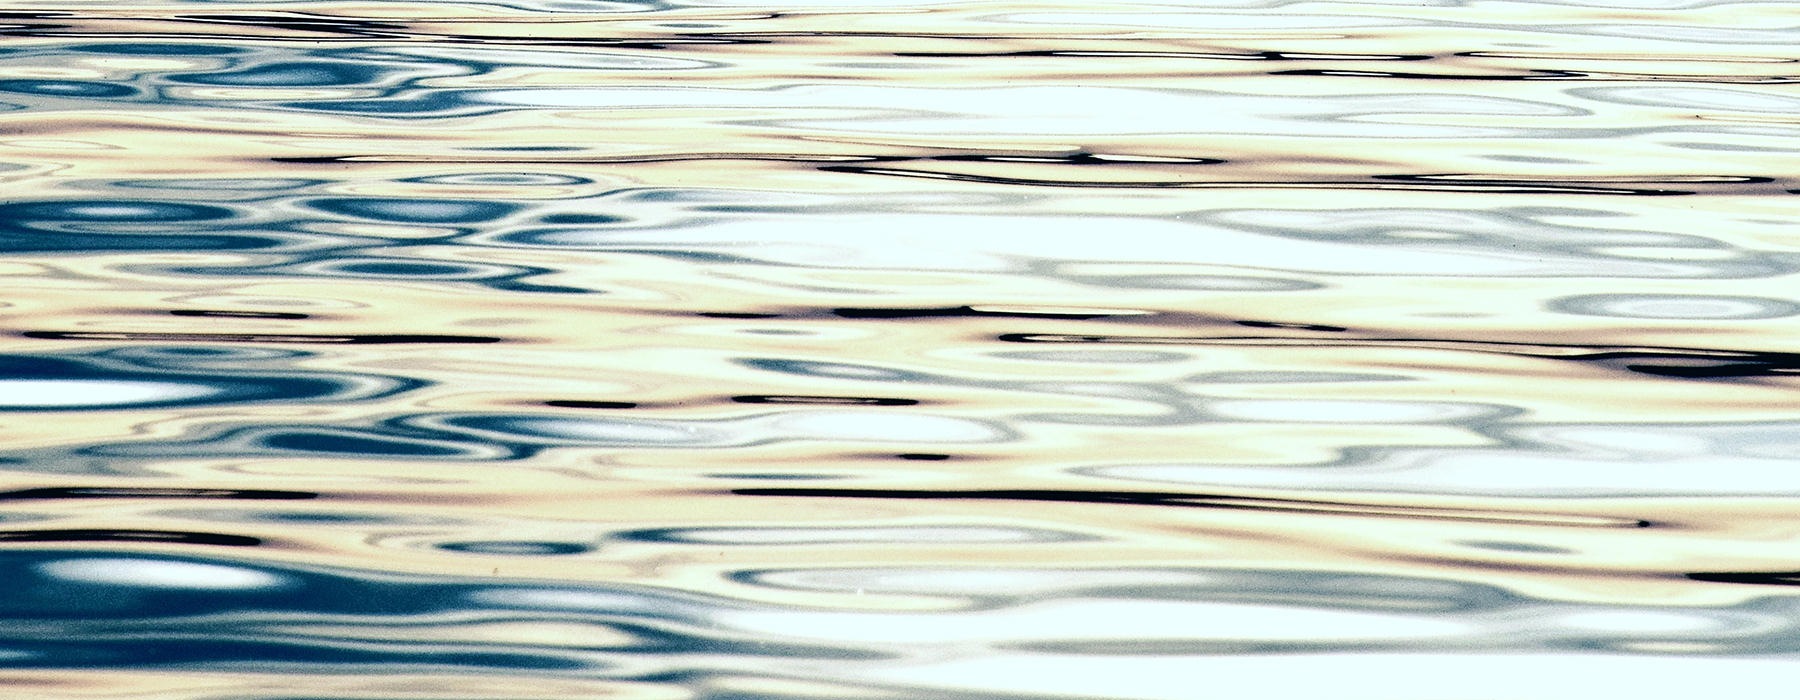 reflective image of ripples